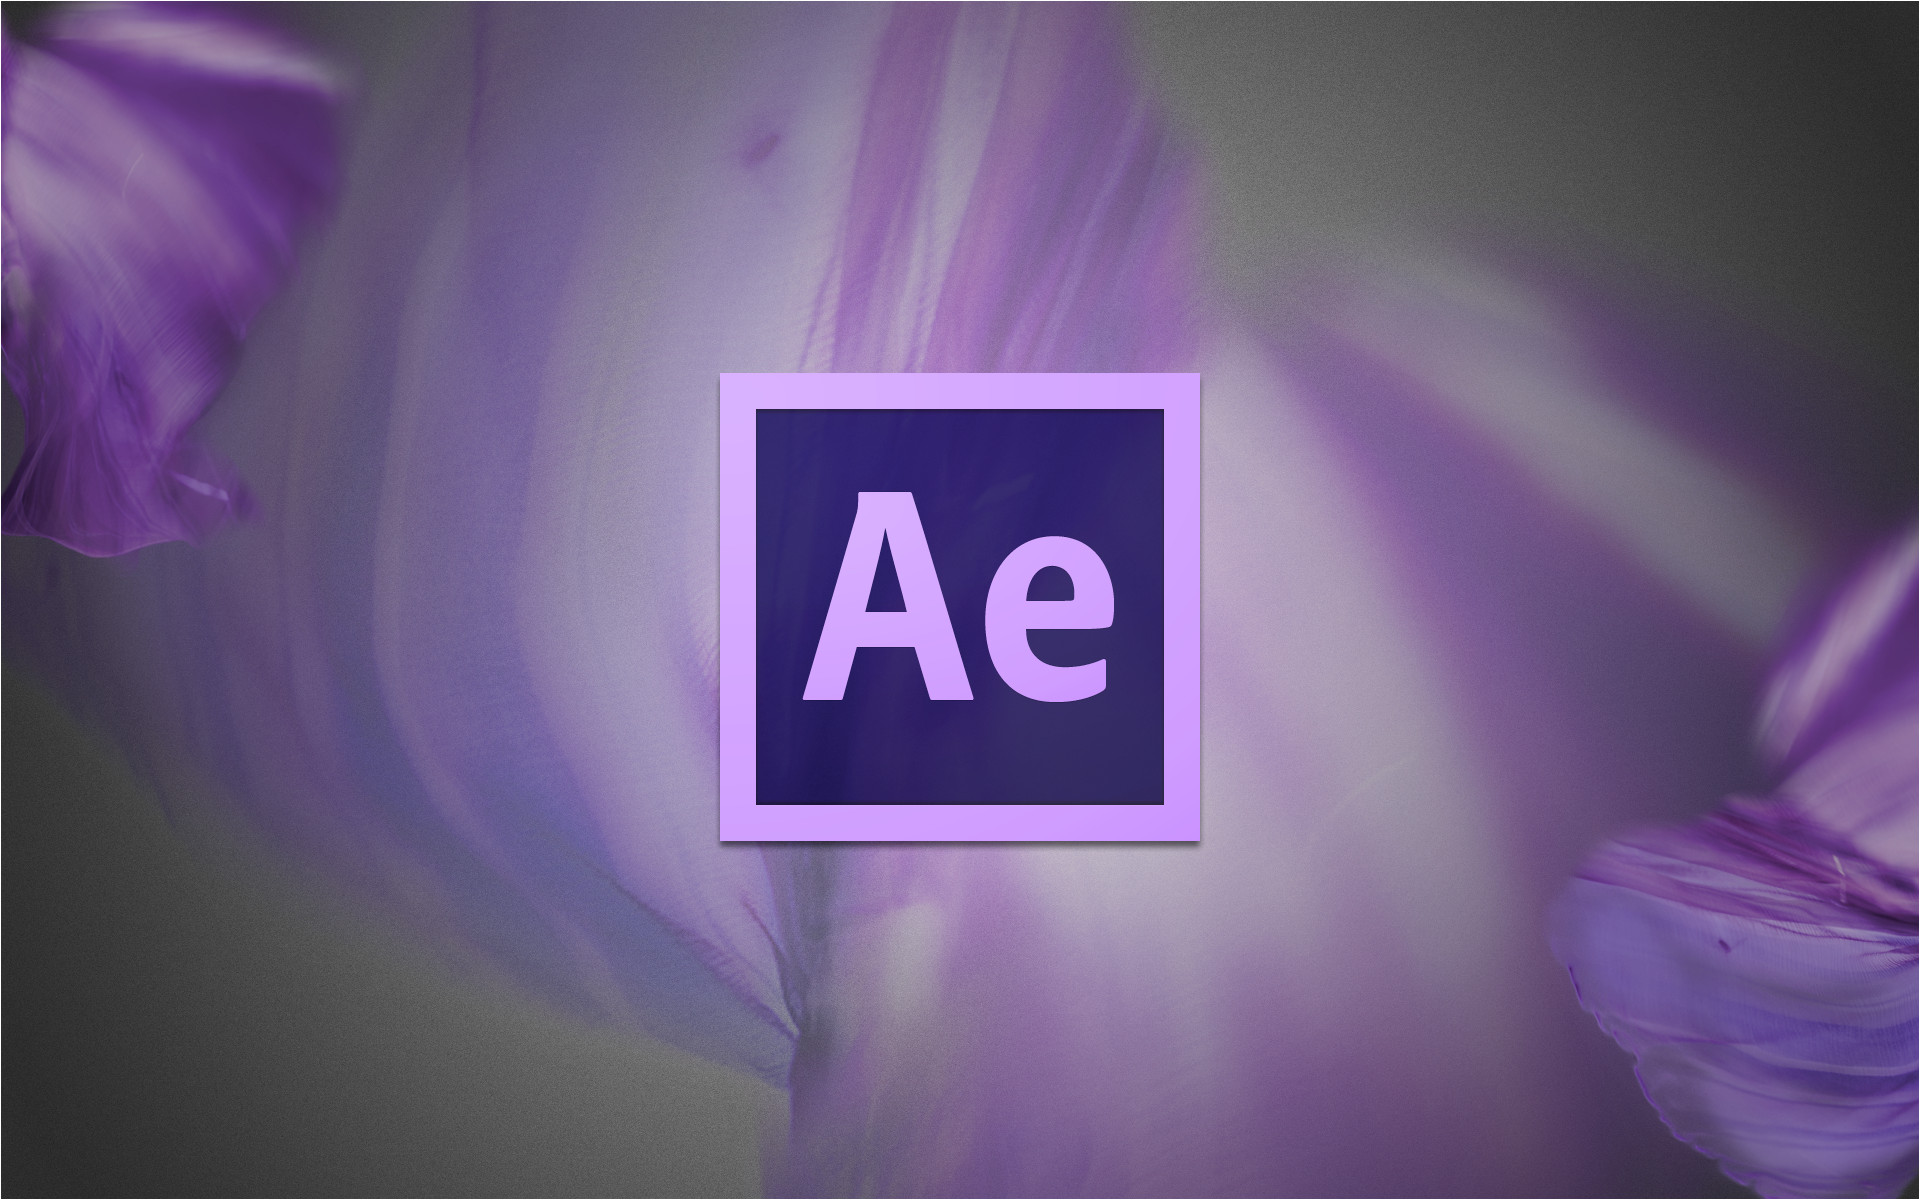 good news after effects templates are now available